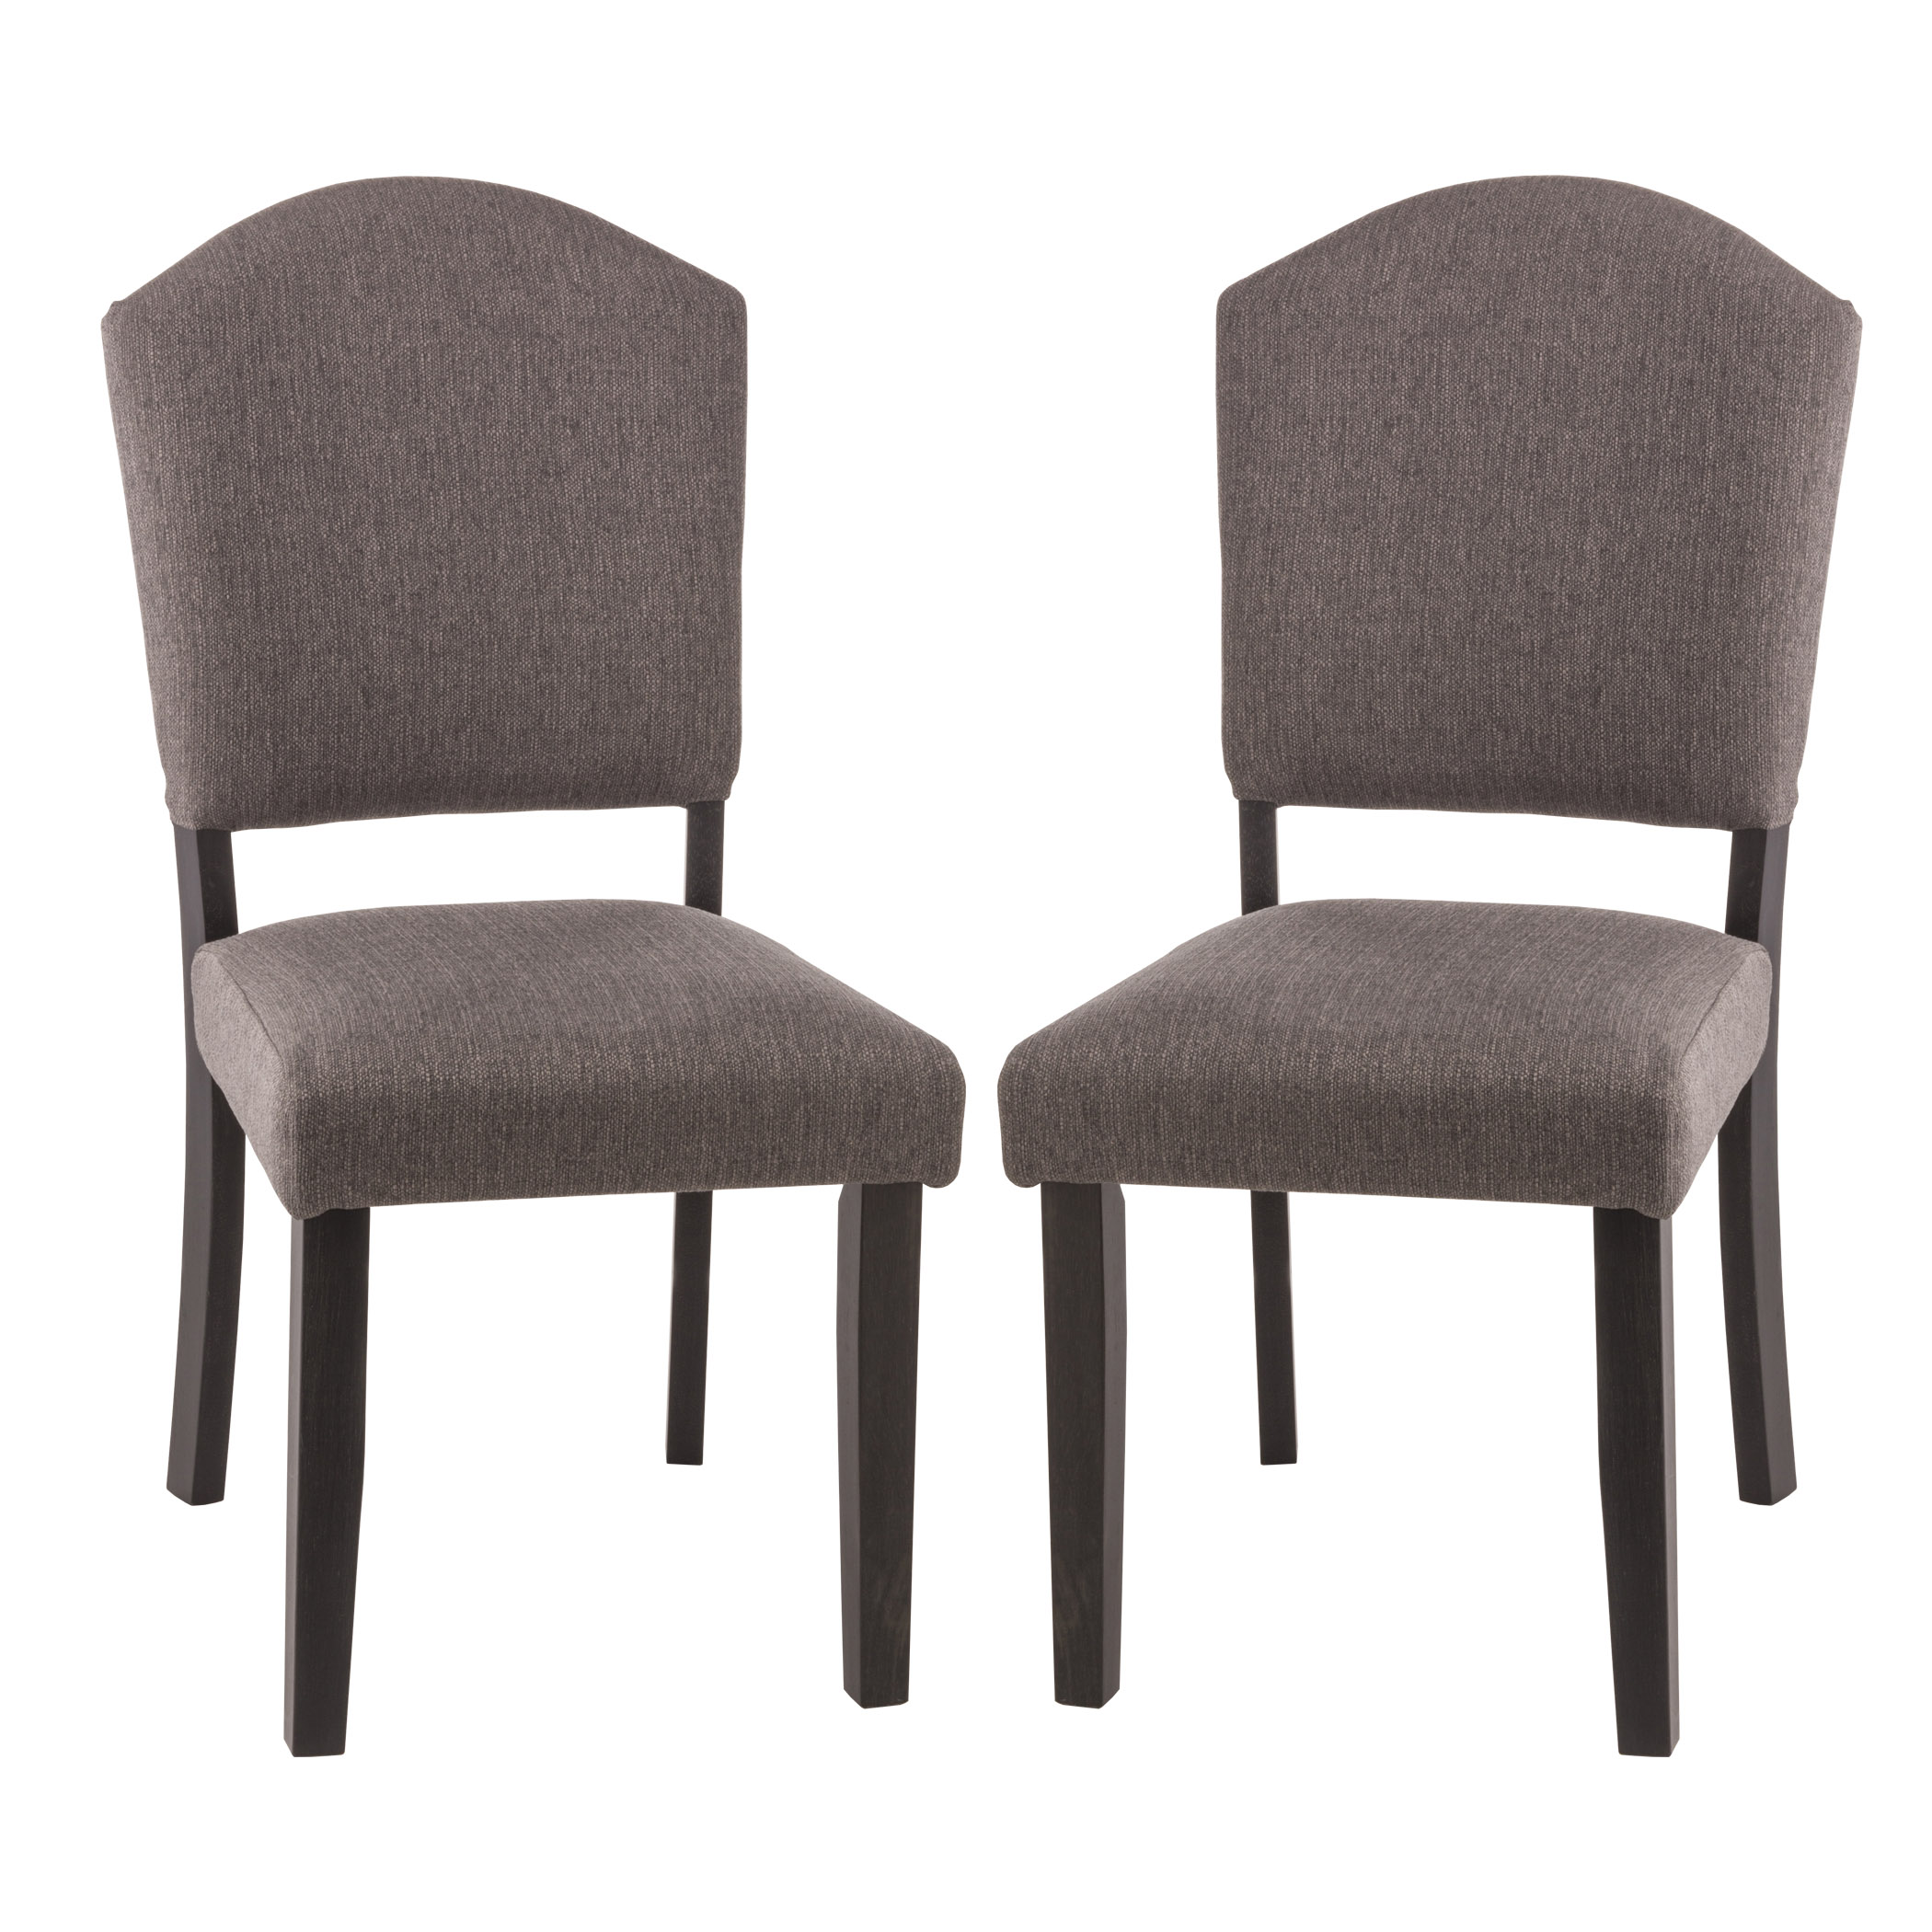 Emerson Dining Chair, Set of 2